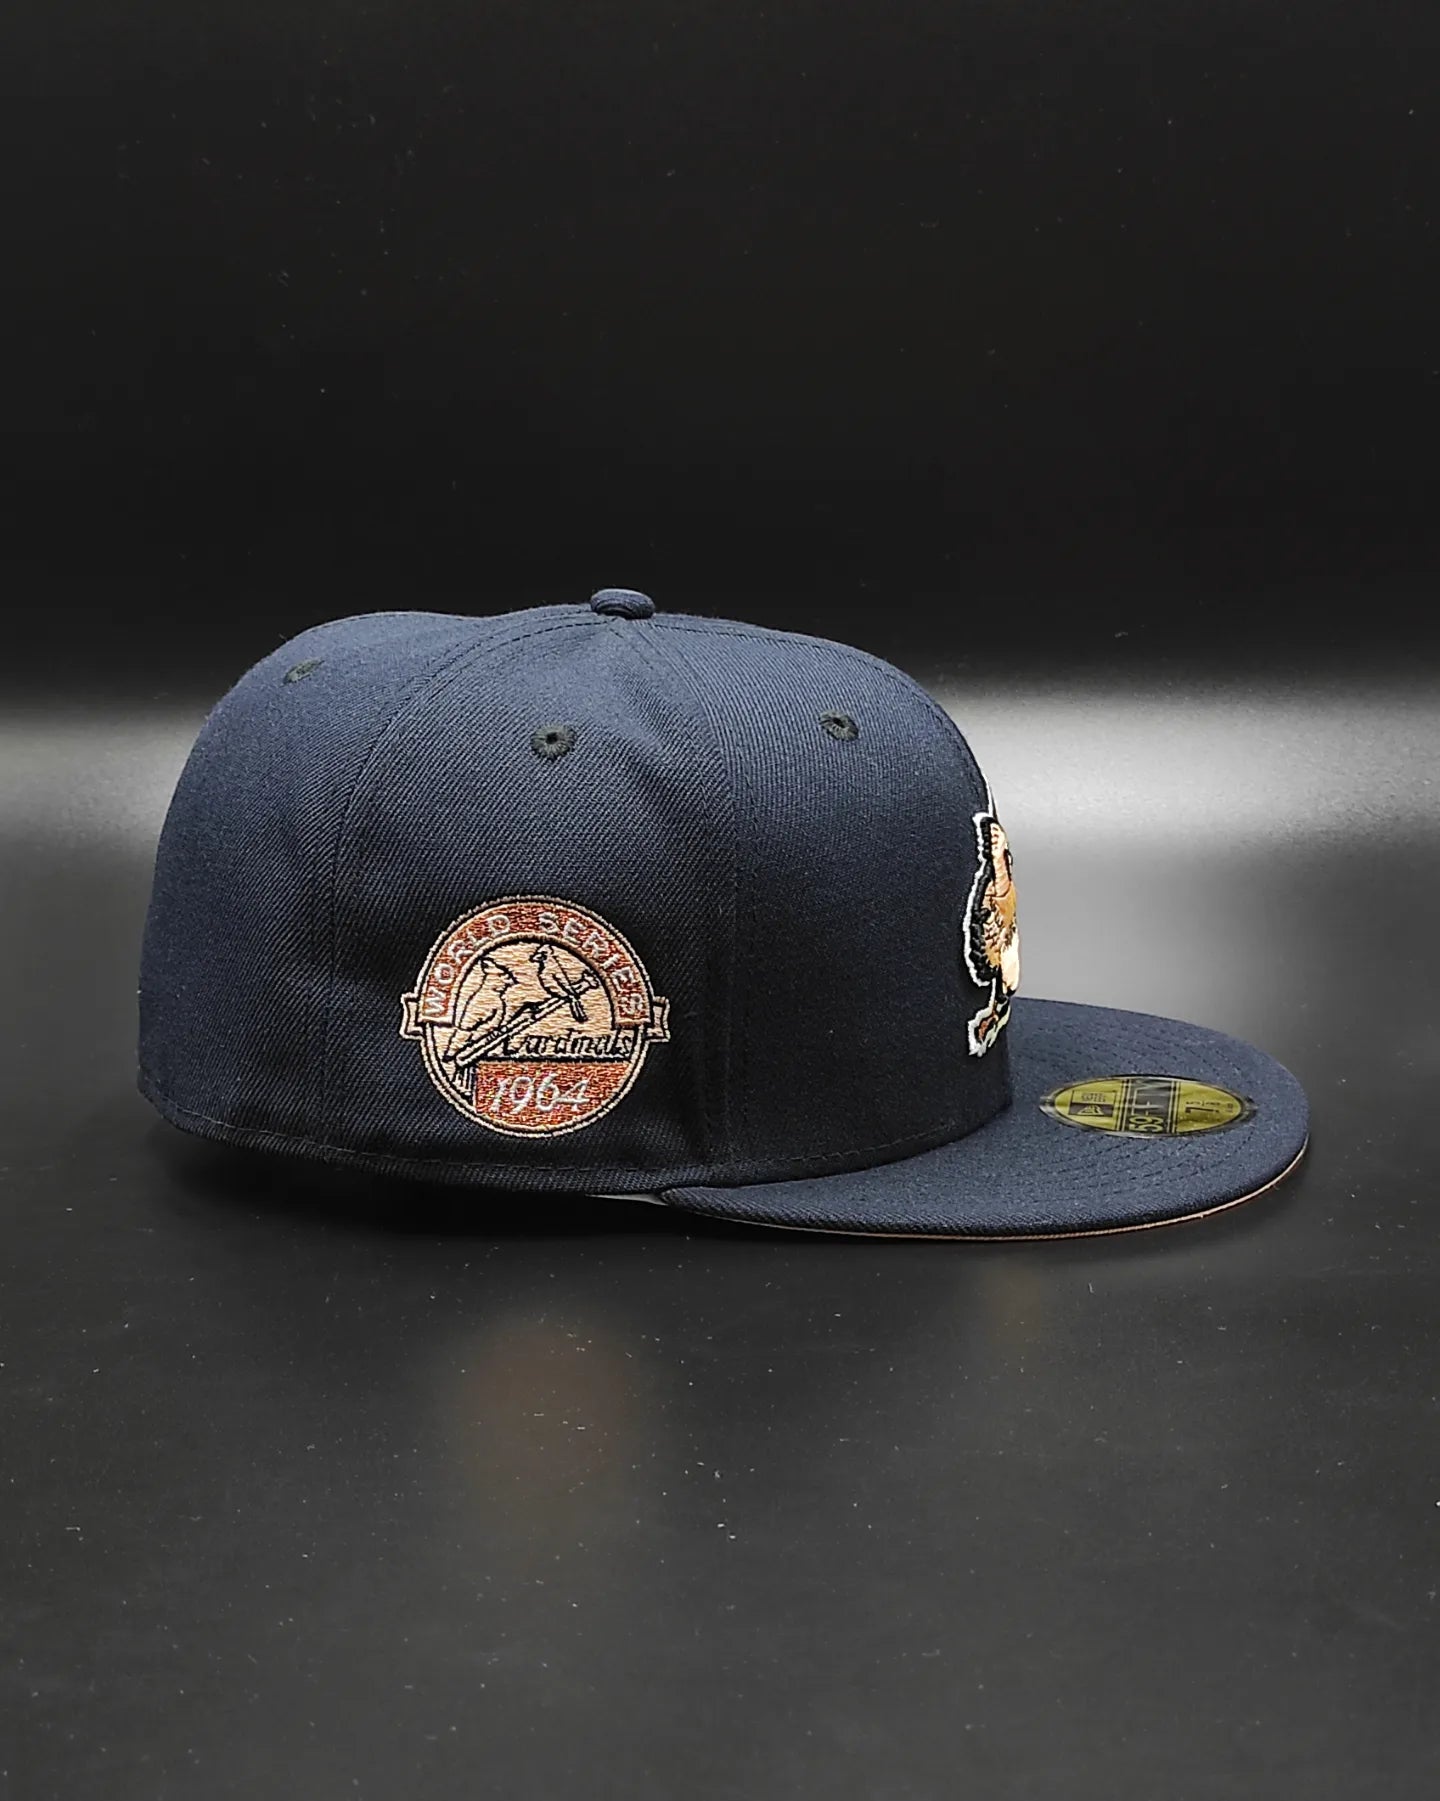 New Era st. louis cardinals world series 1967 navy peach edition 59fifty fitted cap